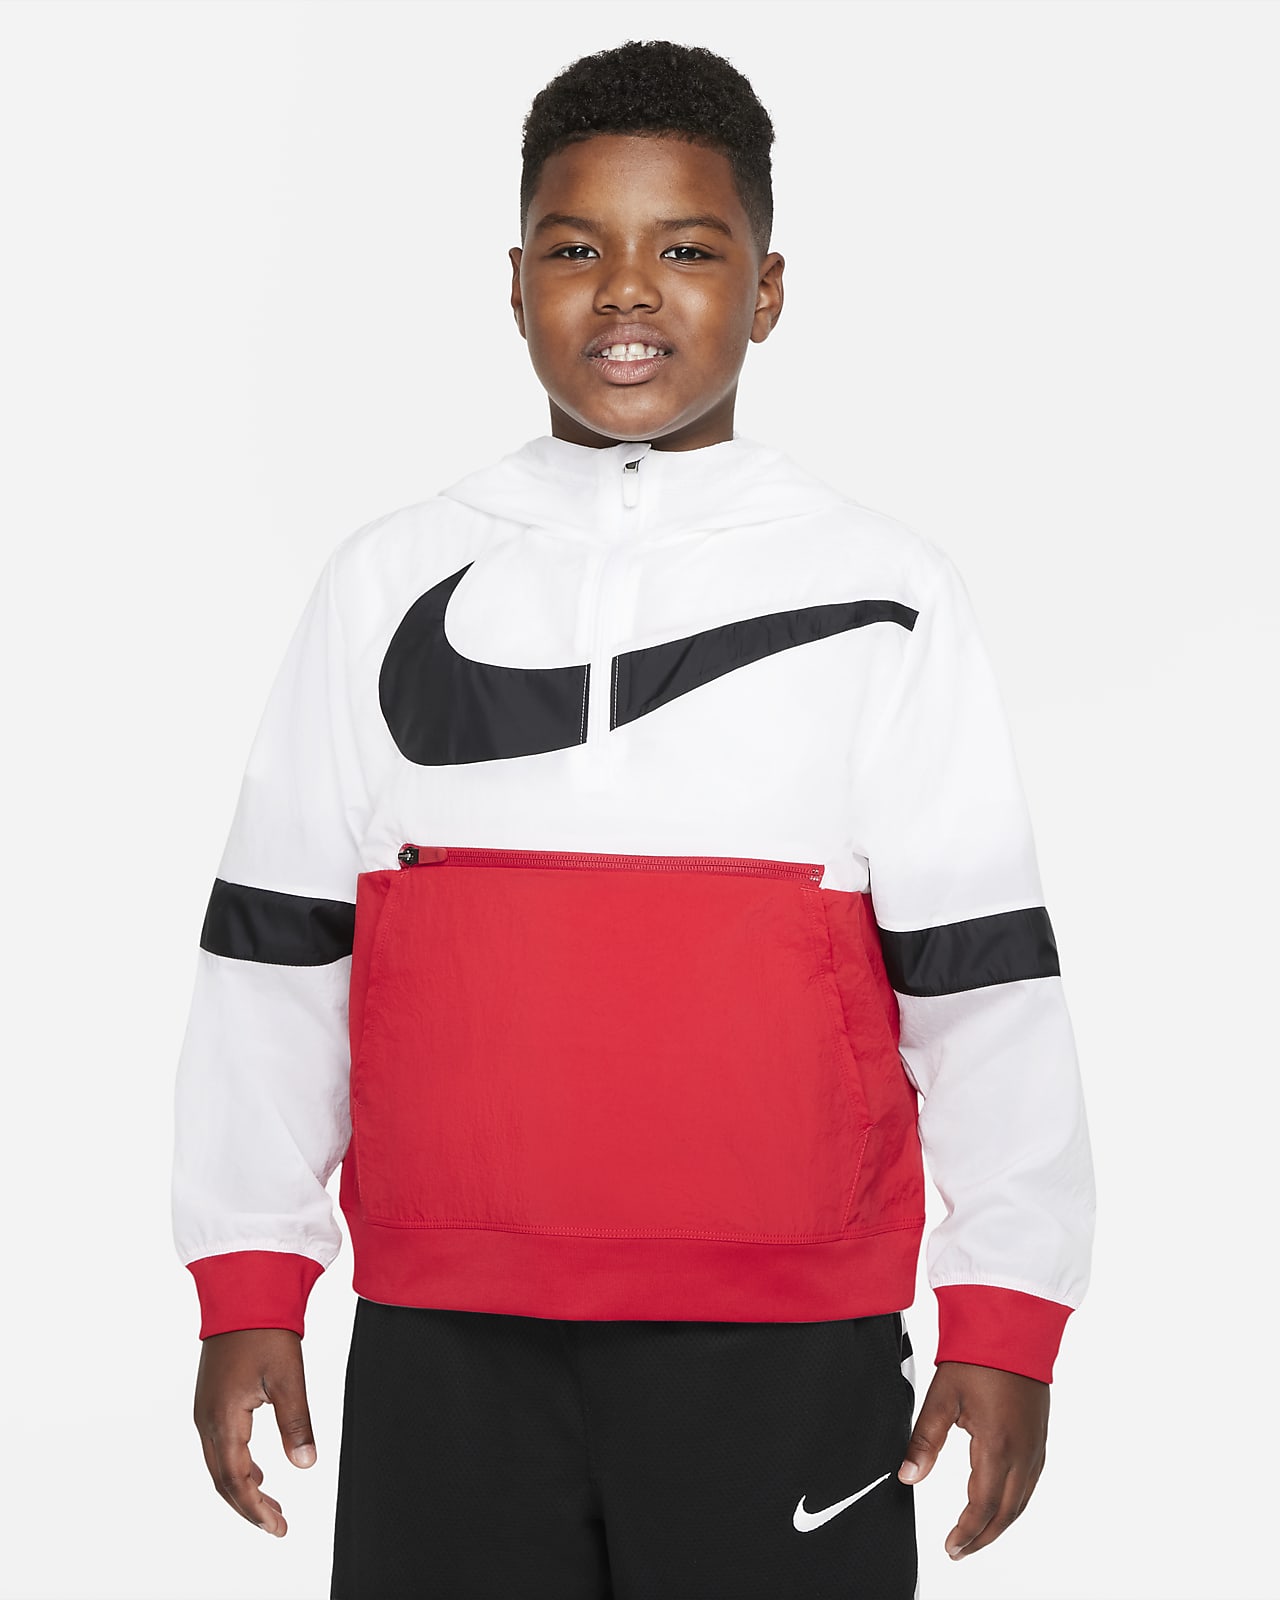 nike store for boys